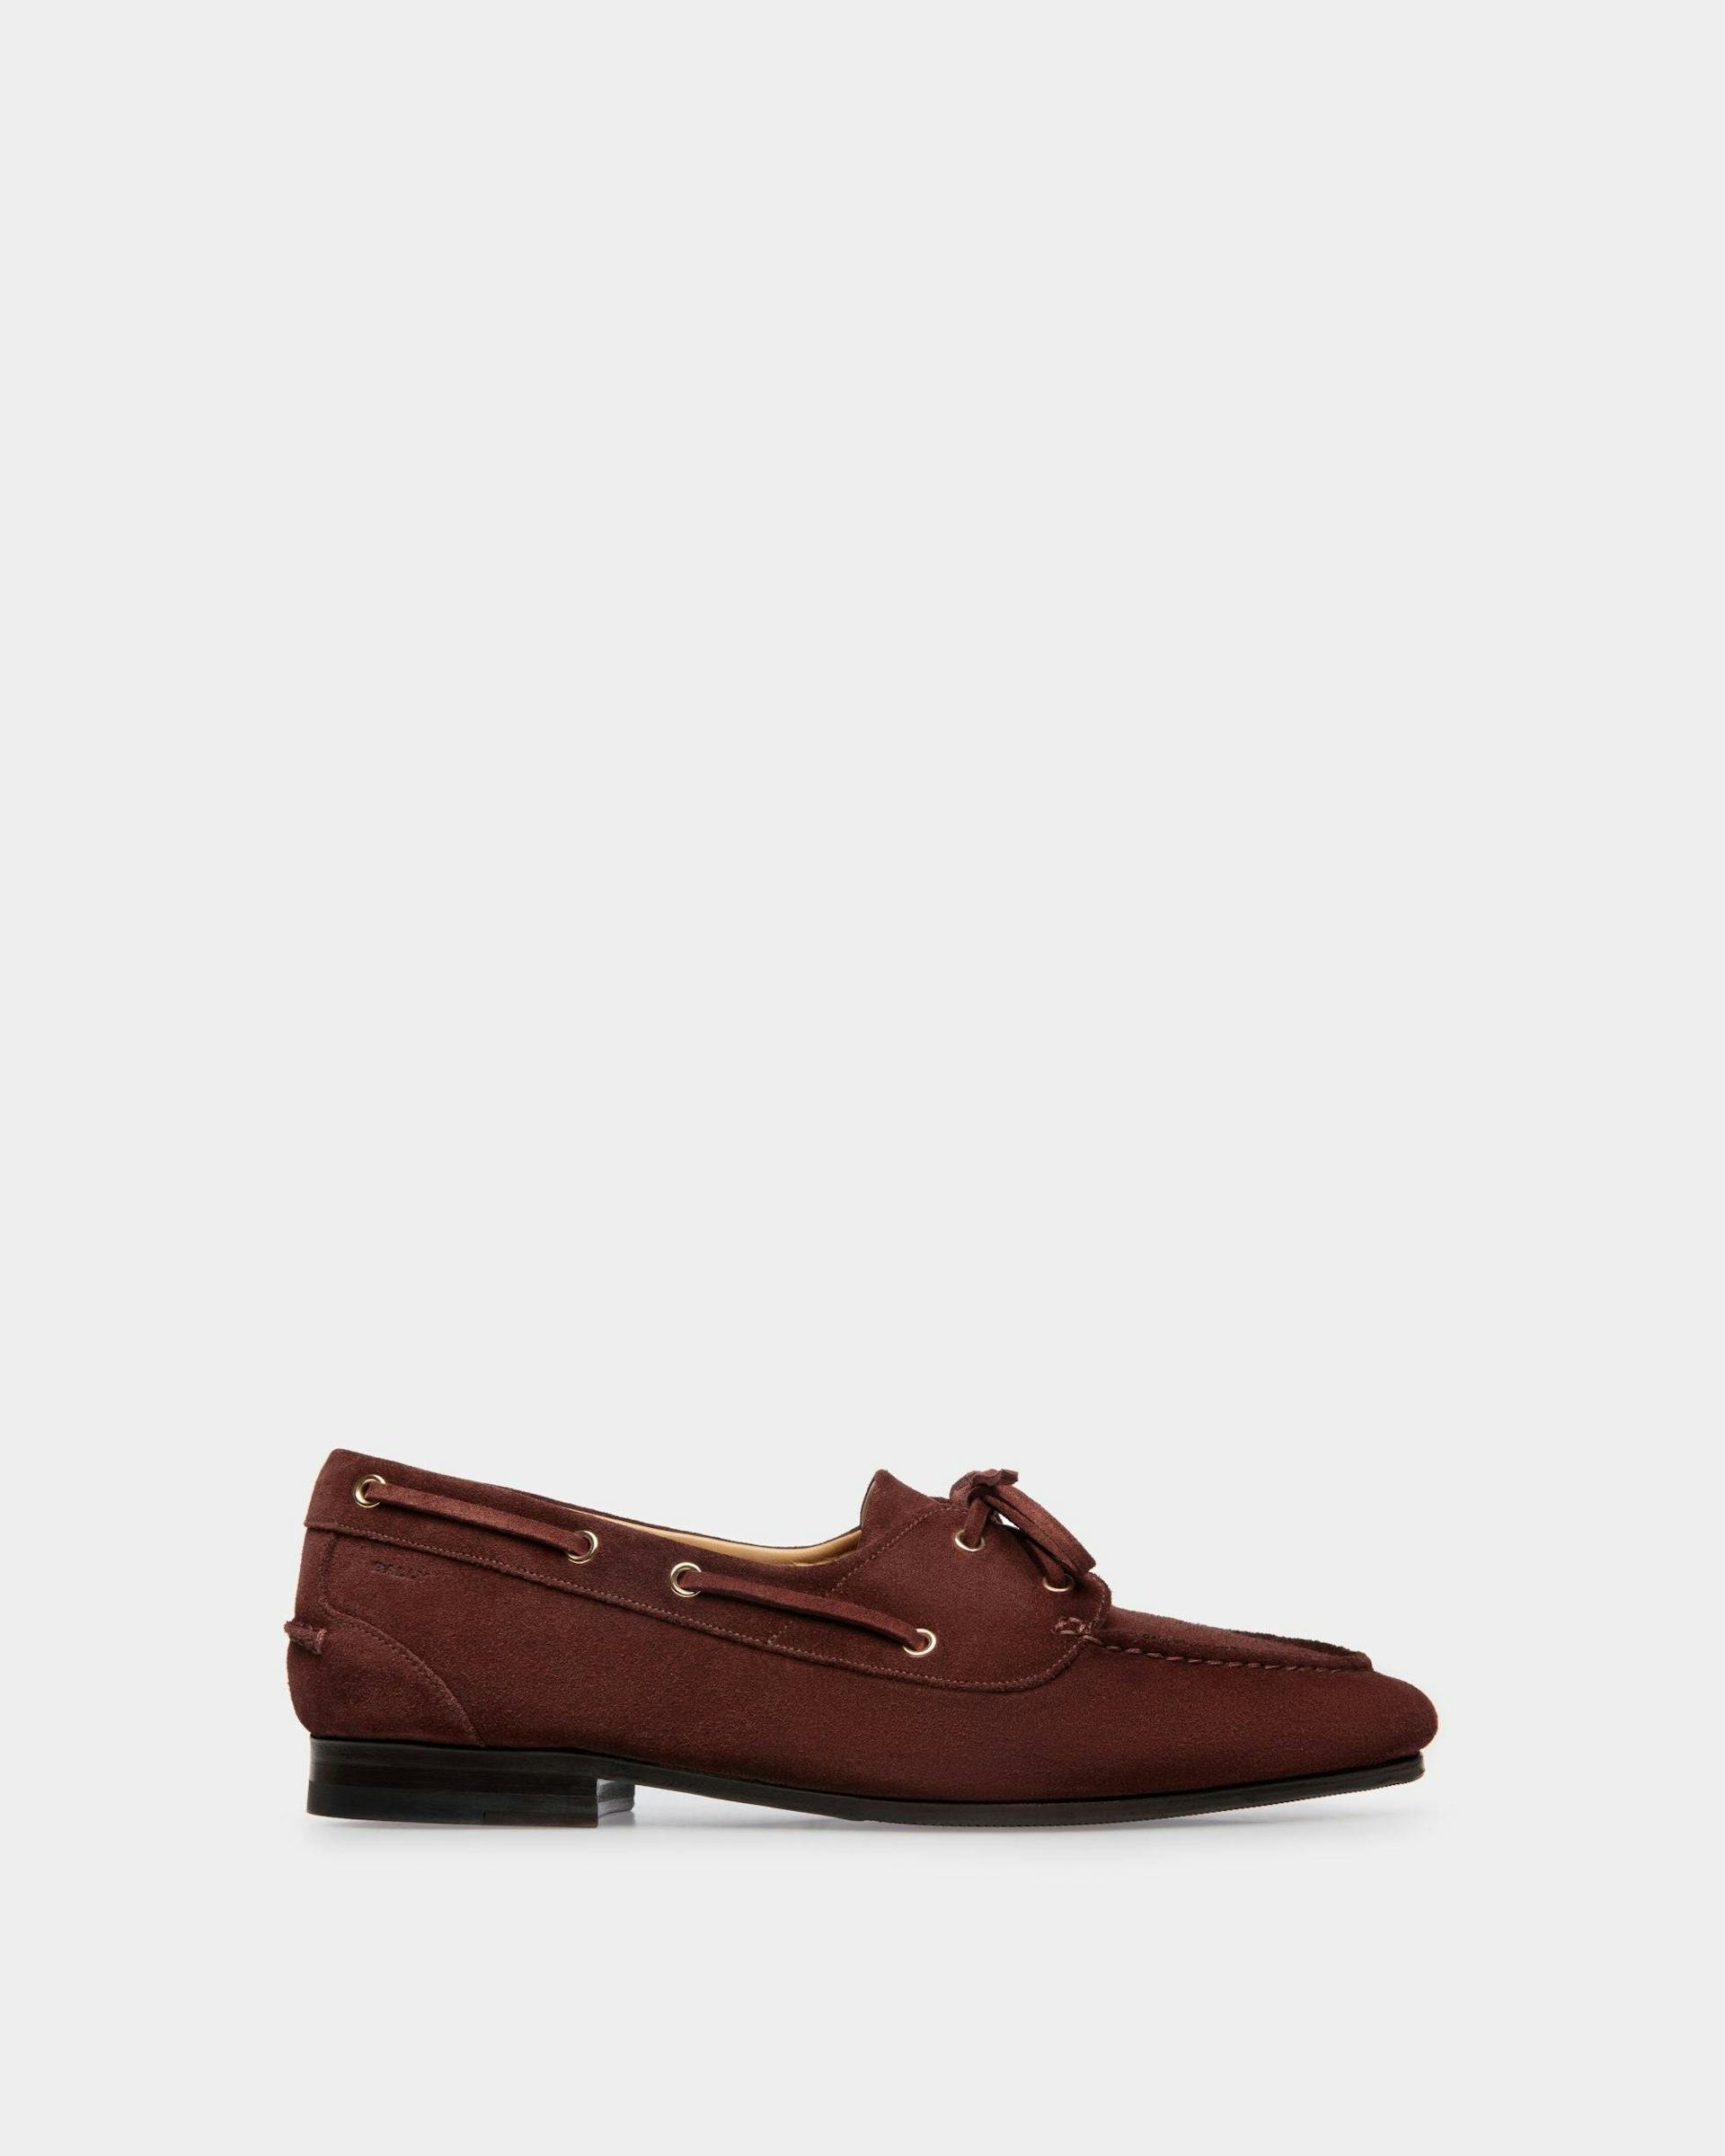 Men's Plume Moccasin in Chestnut Brown Suede | Bally | Still Life Side